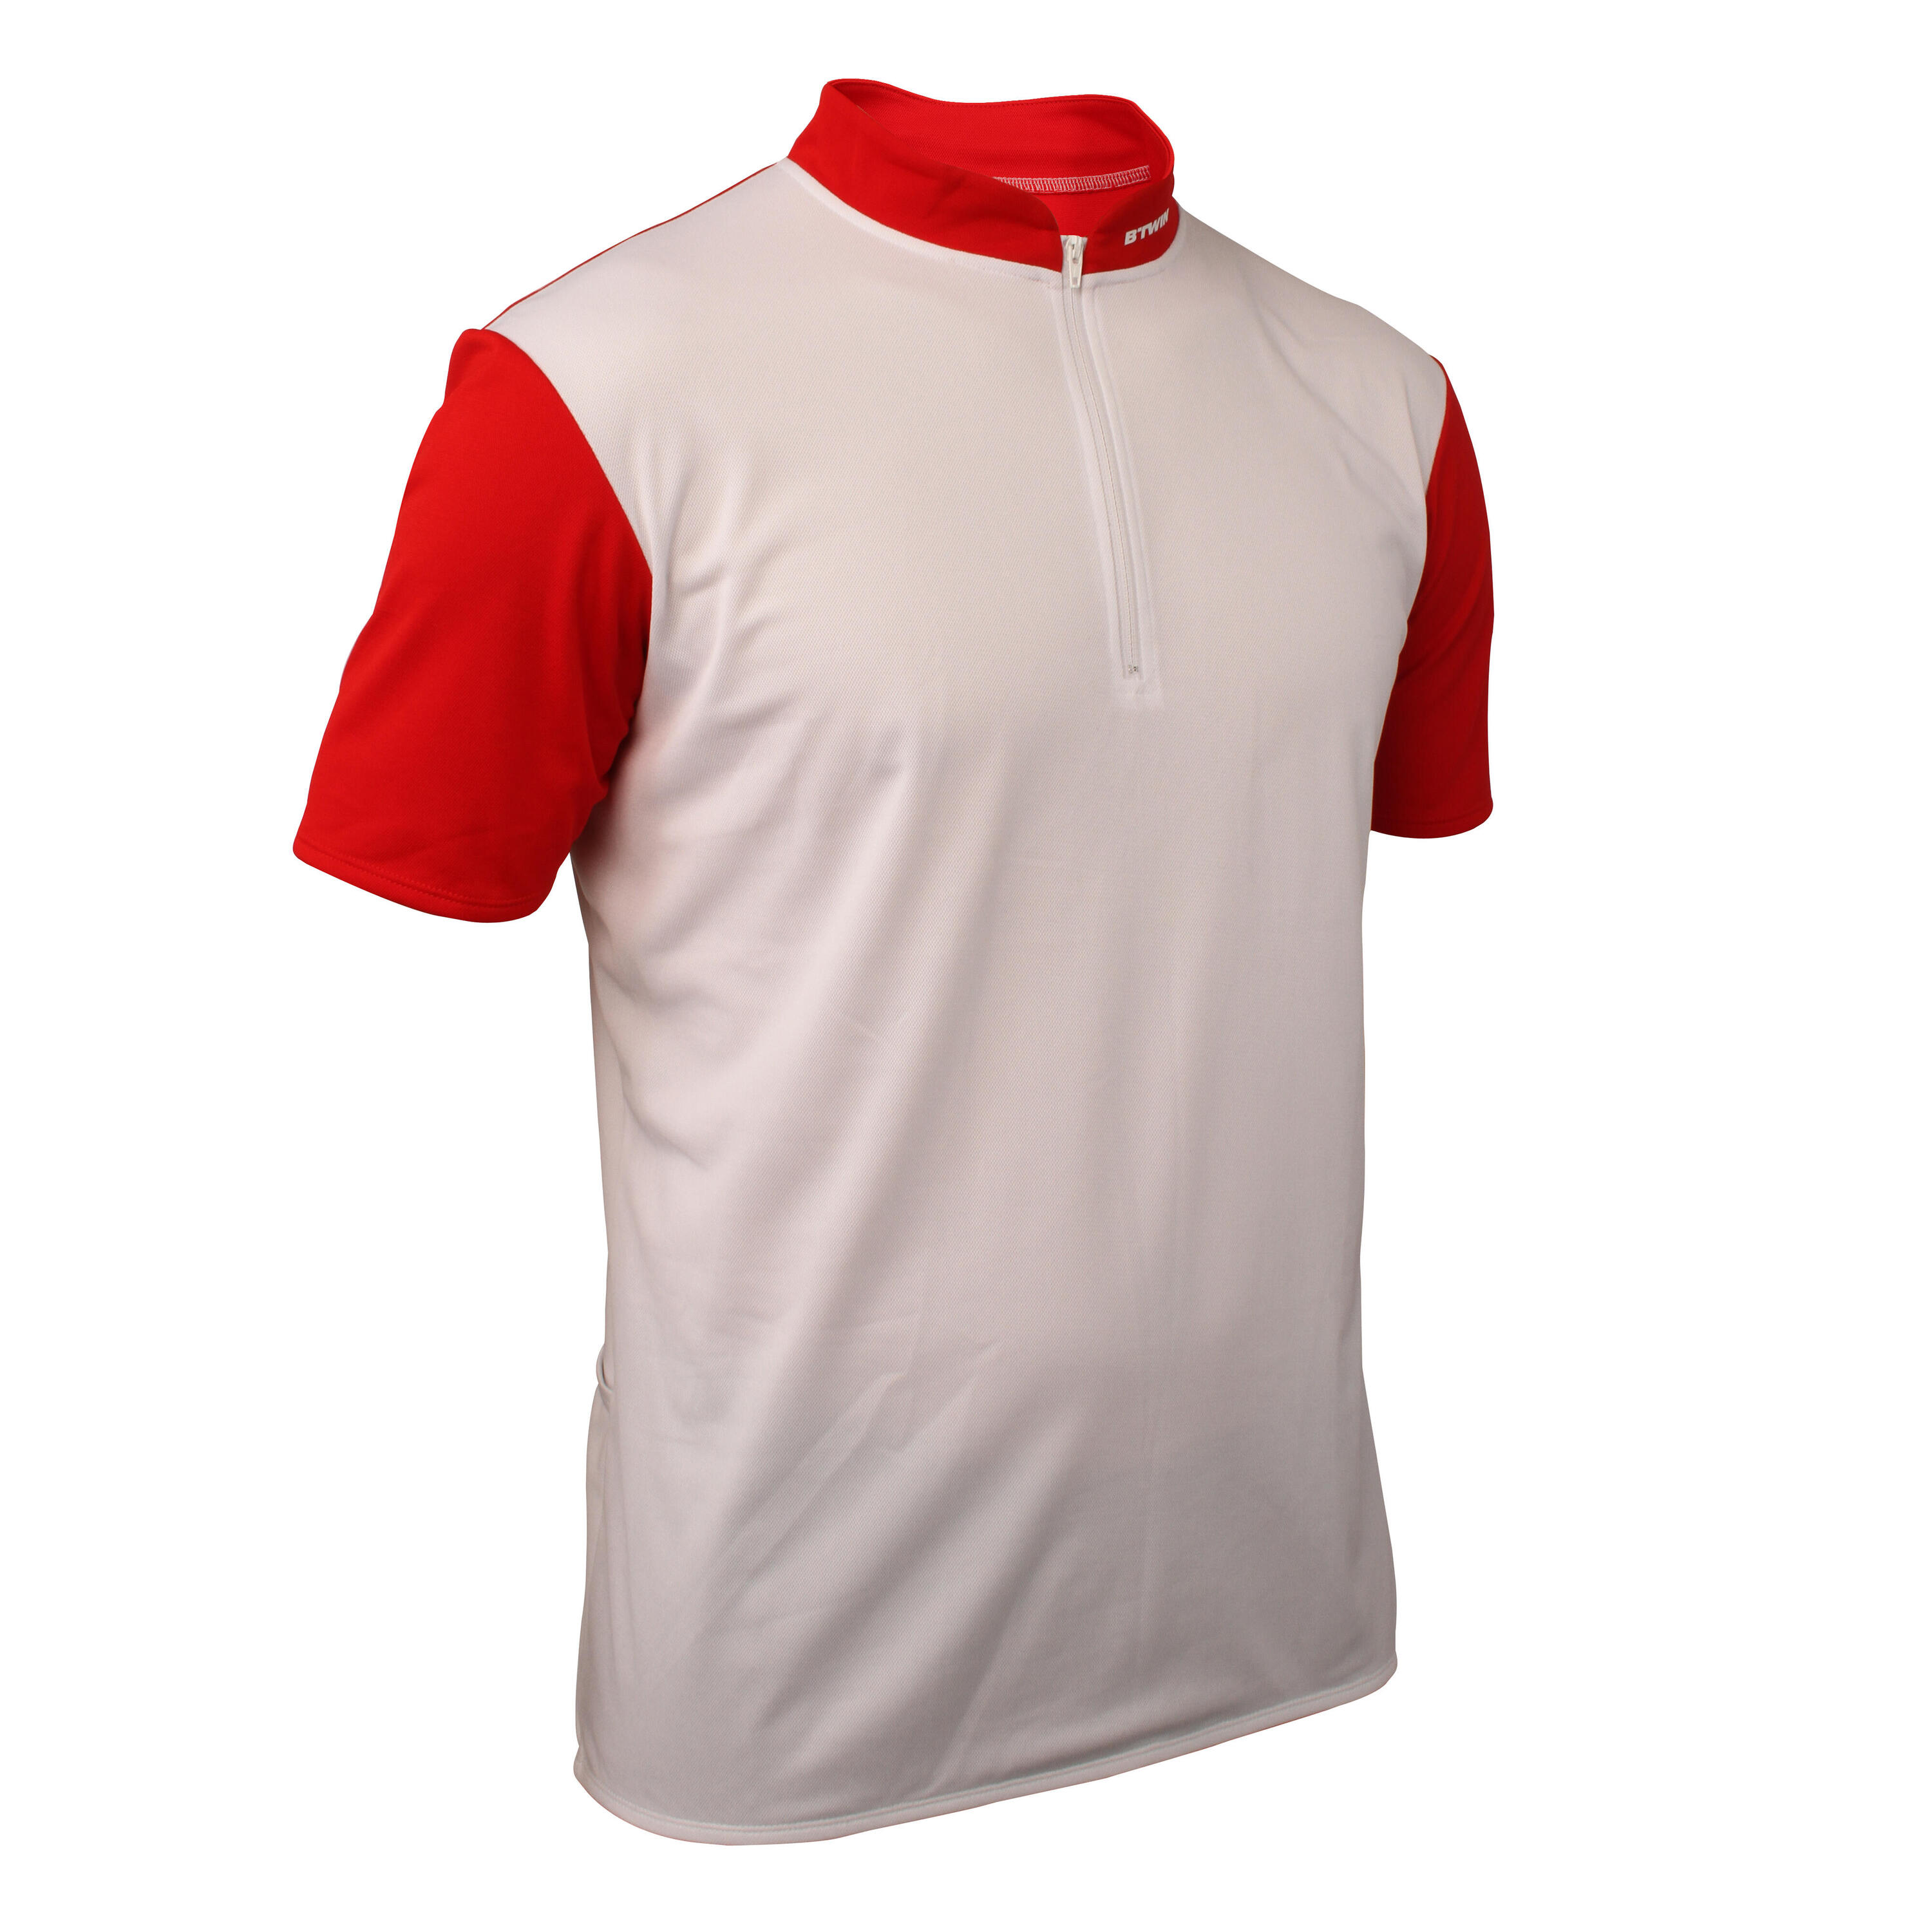 BTWIN Roadcycling 100 Short-Sleeved Cycling Jersey - Red/White